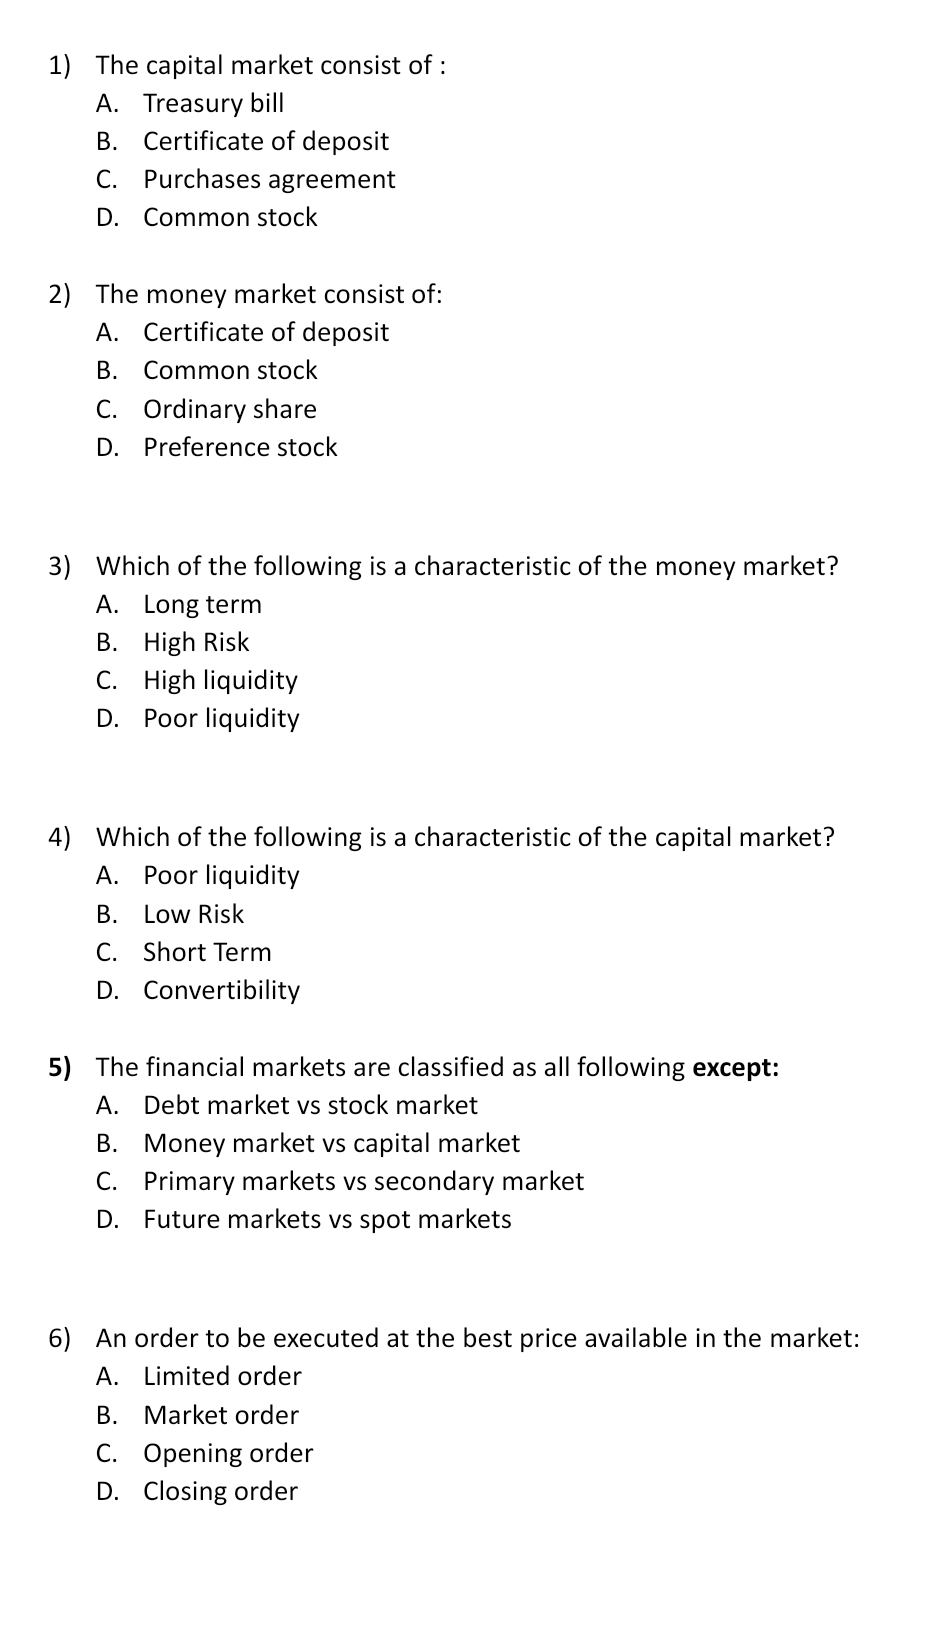 1) The capital market consist of :
A. Treasury bill
B. Certificate of deposit
C. Purchases agreement
D. Common stock
2) The money market consist of:
A. Certificate of deposit
B. Common stock
C. Ordinary share
D.
Preference stock
3) Which of the following is a characteristic of the money market?
A. Long term
B. High Risk
C. High liquidity
D. Poor liquidity
4) Which of the following is a characteristic of the capital market?
A. Poor liquidity
B. Low Risk
C. Short Term
D. Convertibility
5) The financial markets are classified as all following except:
A. Debt market vs stock market
B. Money market vs capital market
C. Primary markets vs secondary market
D. Future markets vs spot markets
6) An order to be executed at the best price available in the market:
A. Limited order
В.
Market order
C. Opening order
D. Closing order
